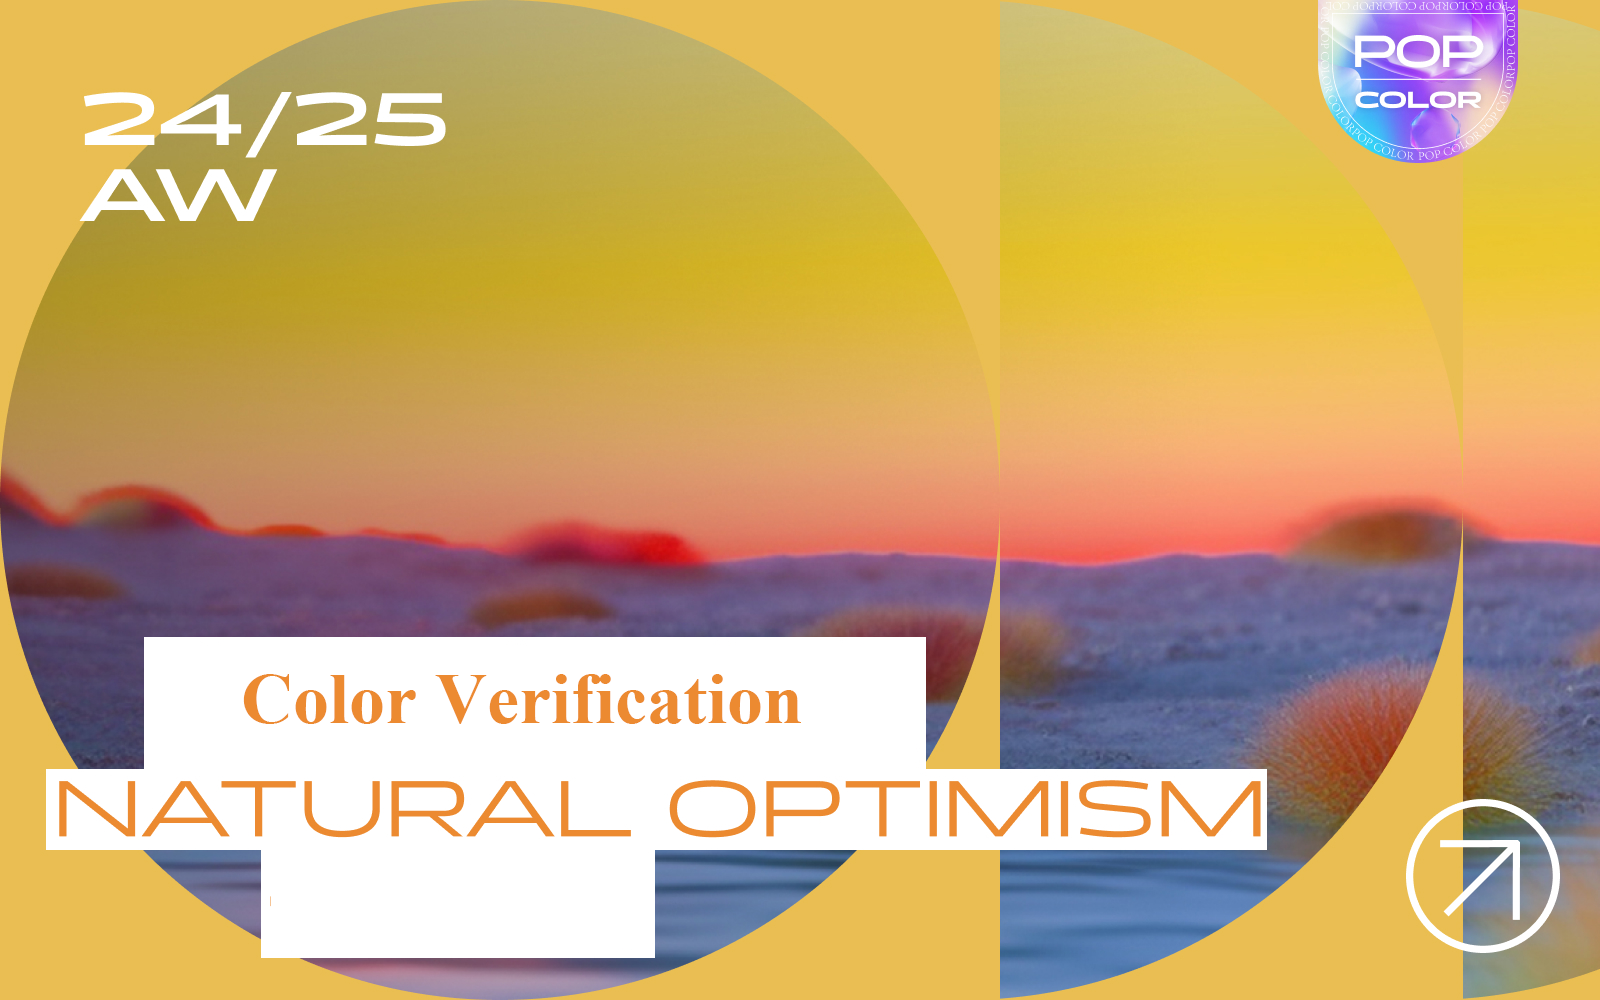 Natural Optimism -- The Color Verification of Womenswear